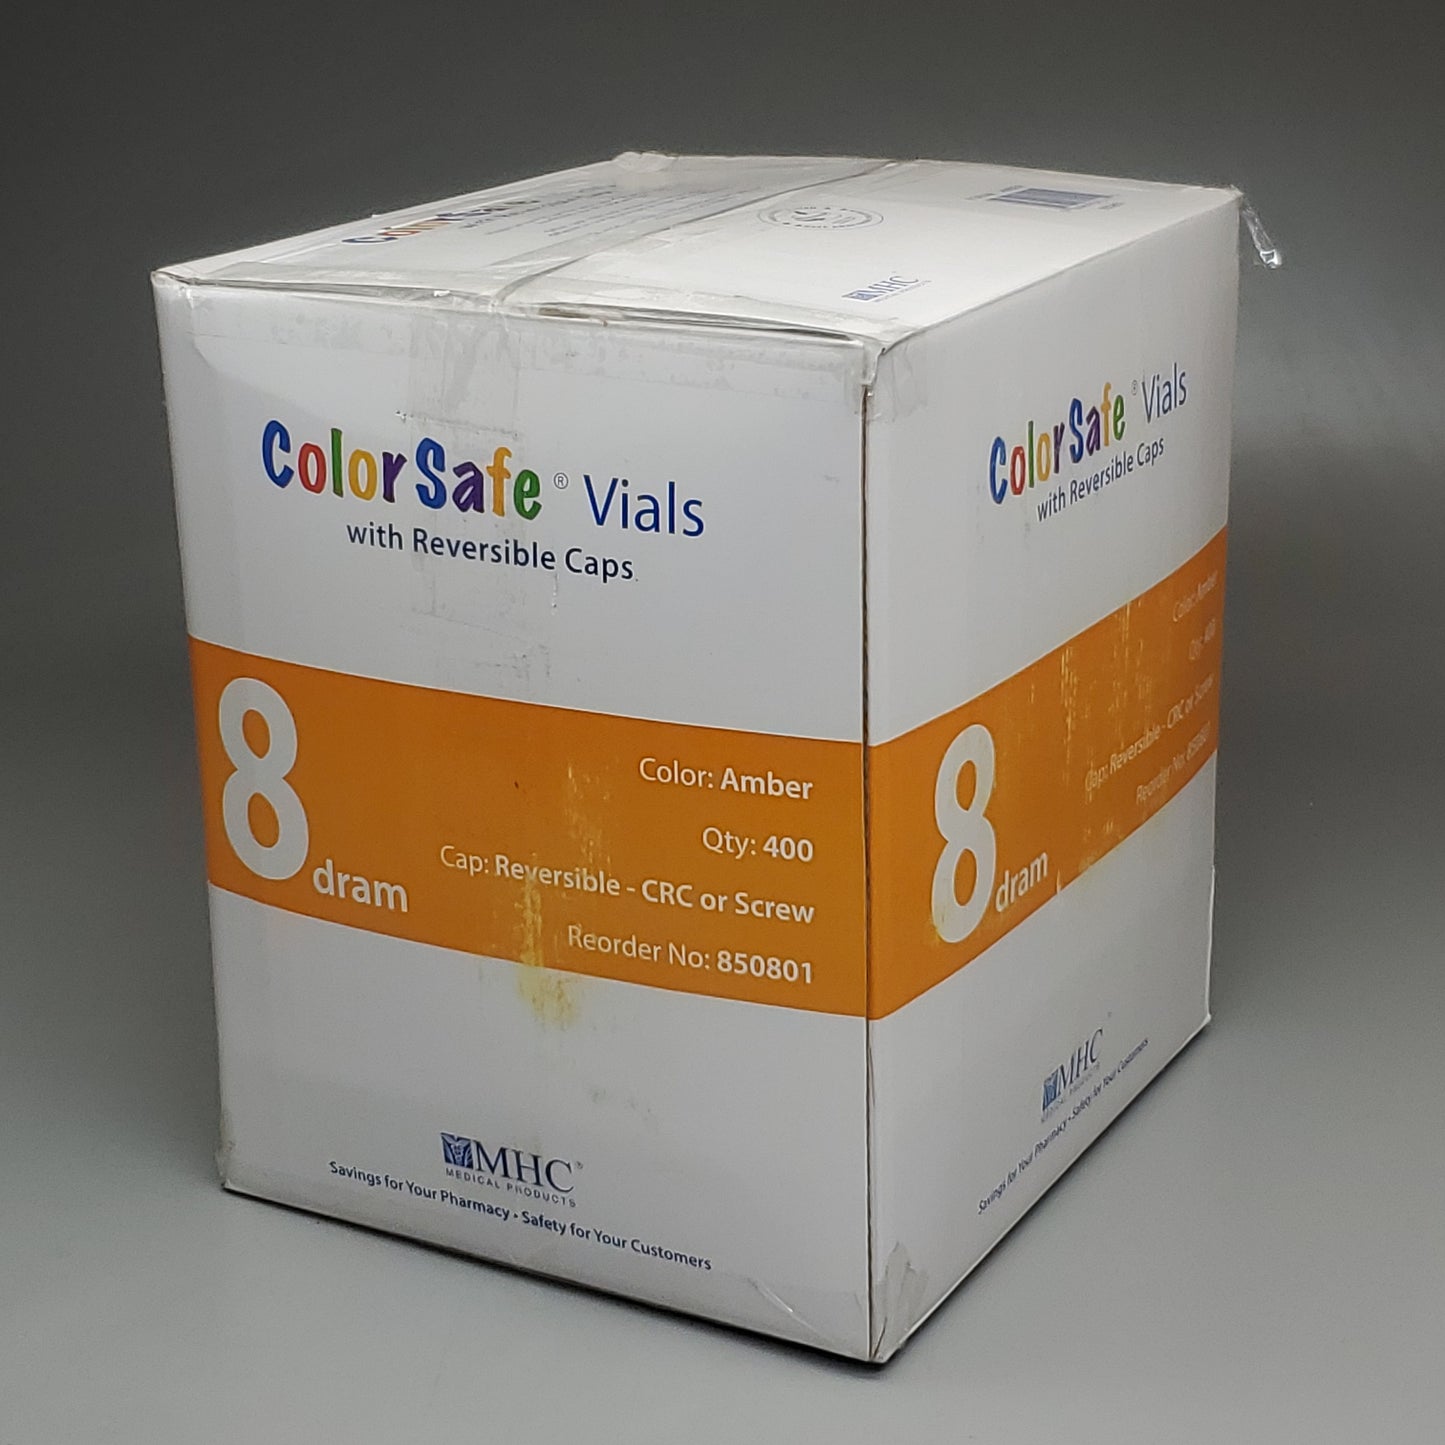 COLORSAFE Vials (400 PACK) 8 dram Amber Vial & Reversible Caps 850801 (New Other)